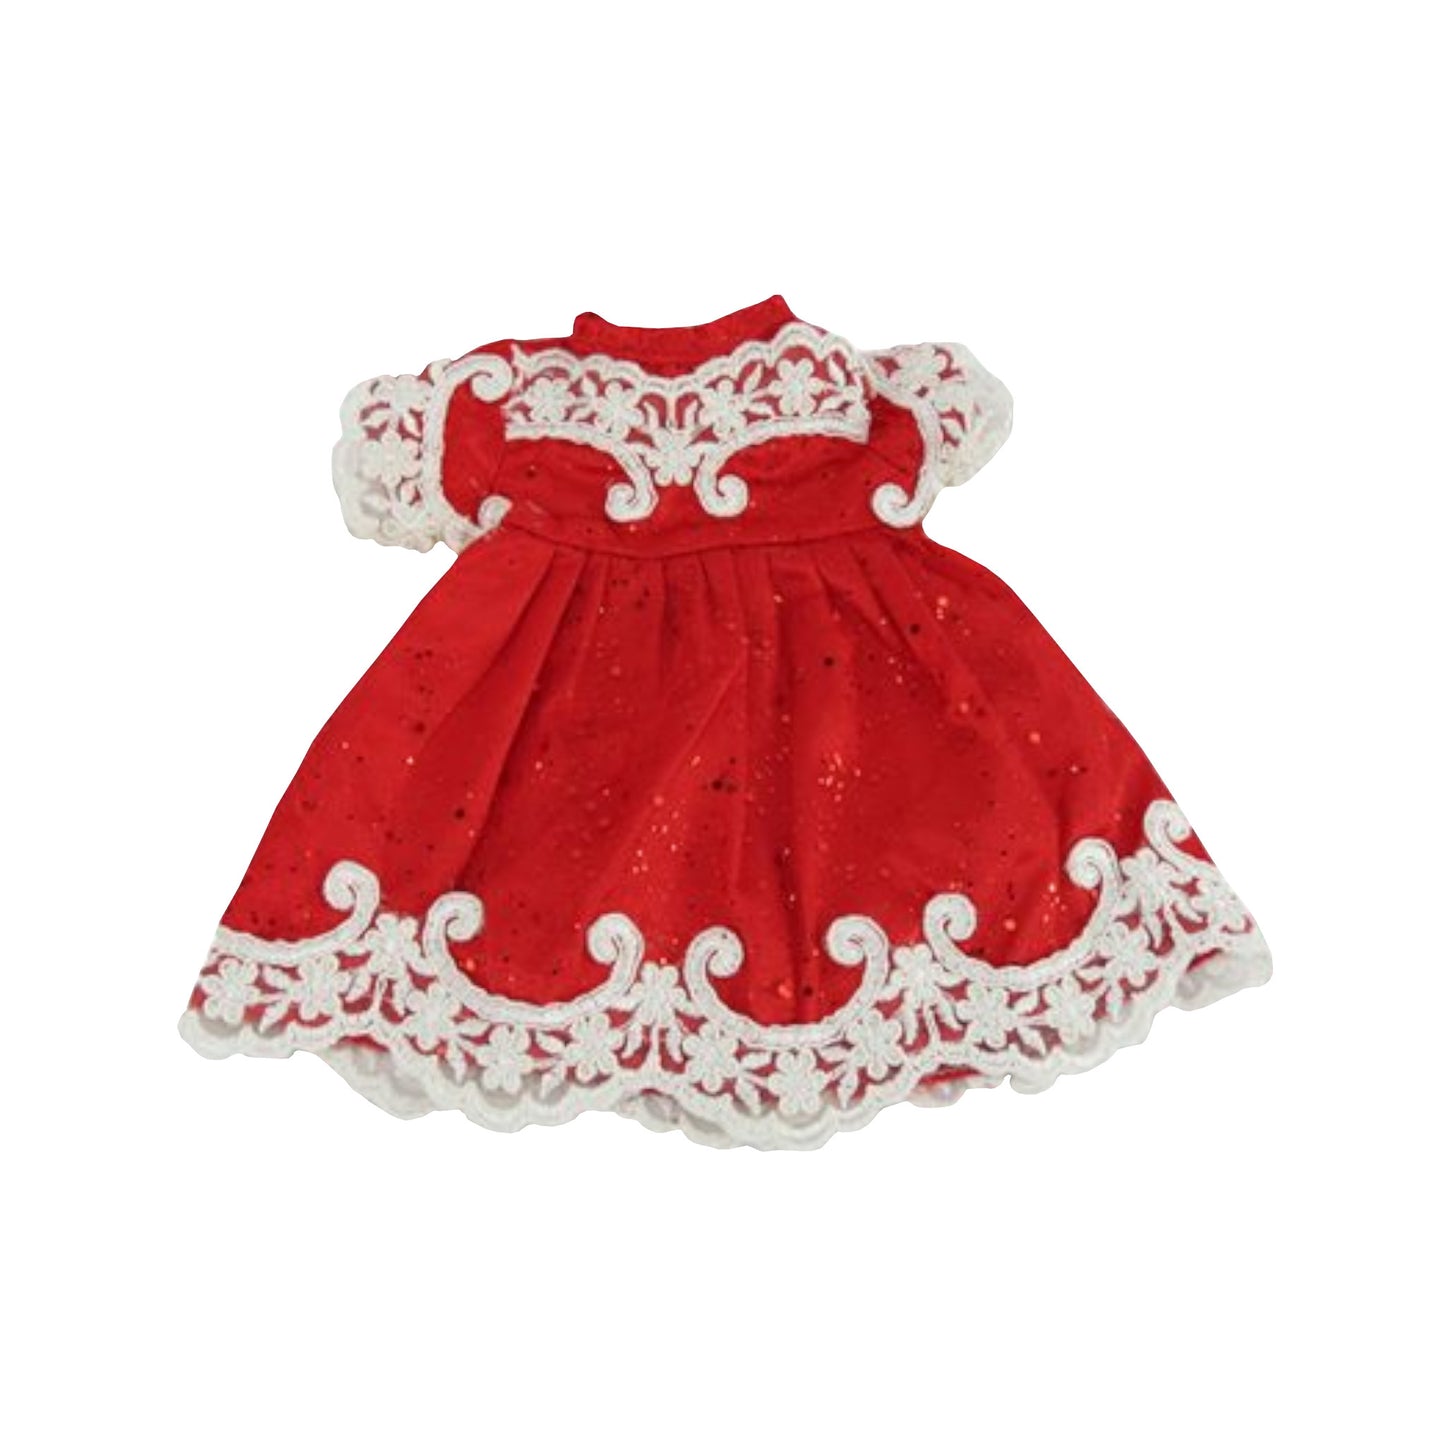 Red Dress with White Embroidery for 18-inch dolls Flat